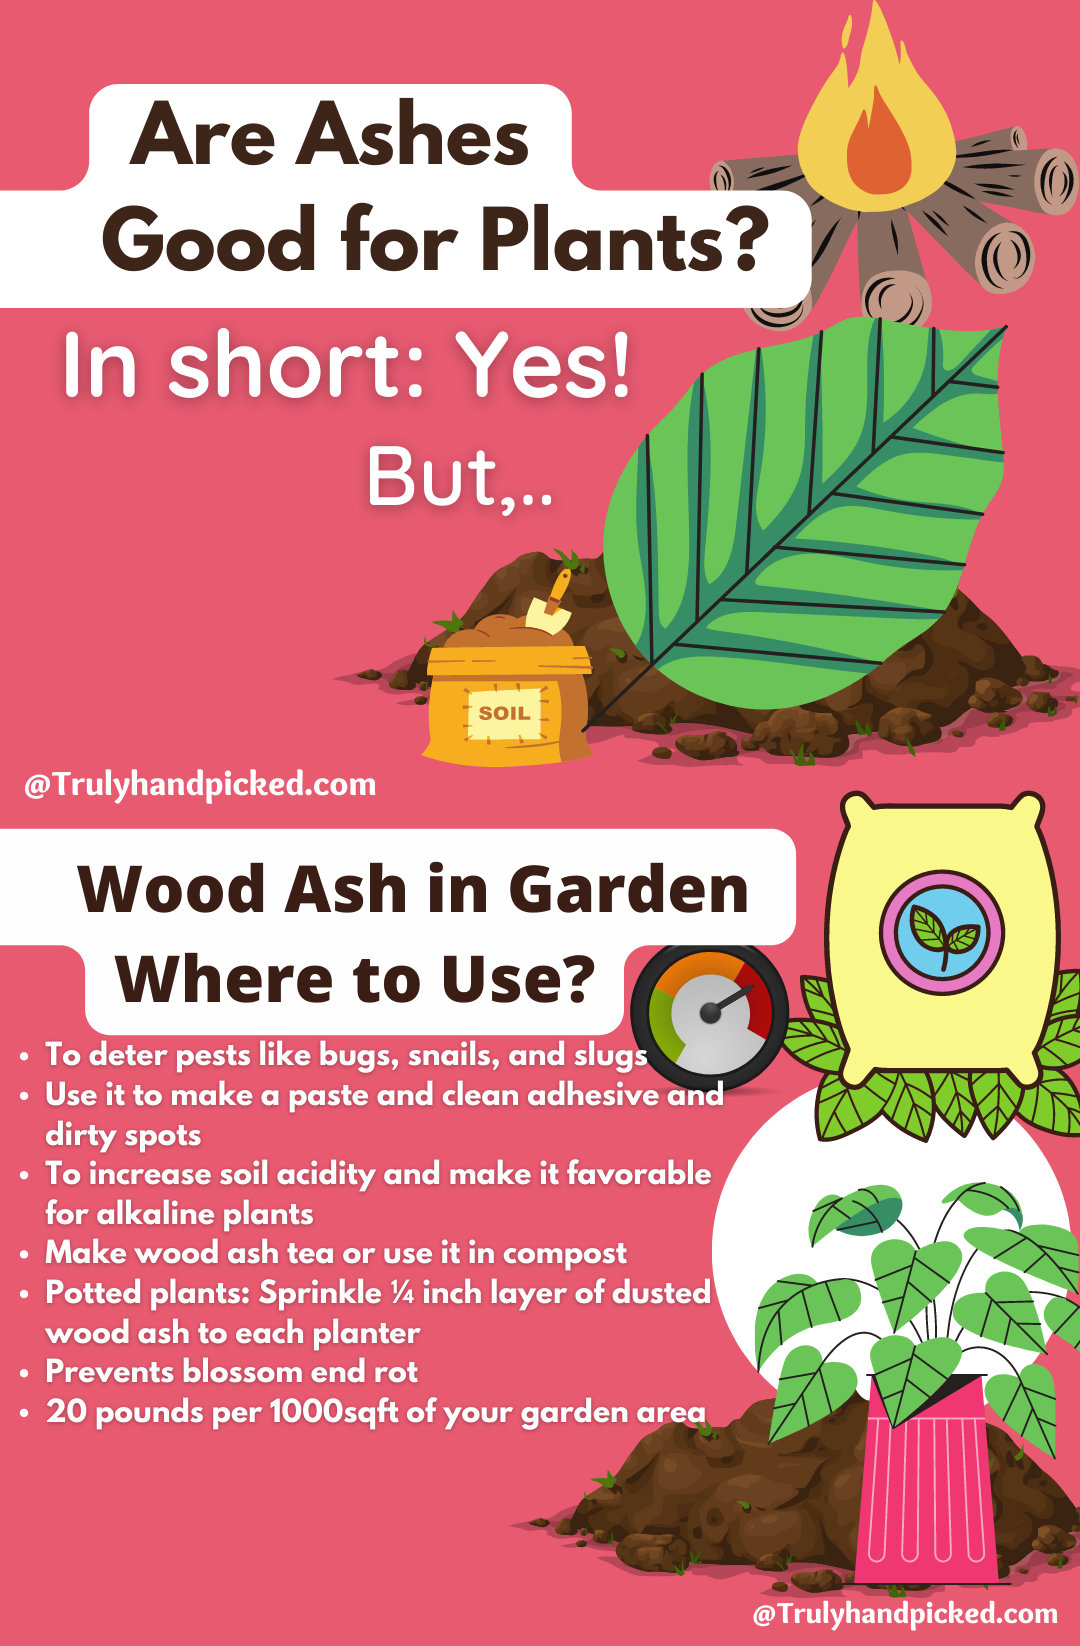 Pinterest Image Using Wood Ash in Garden - Are Ashes Good for Plants